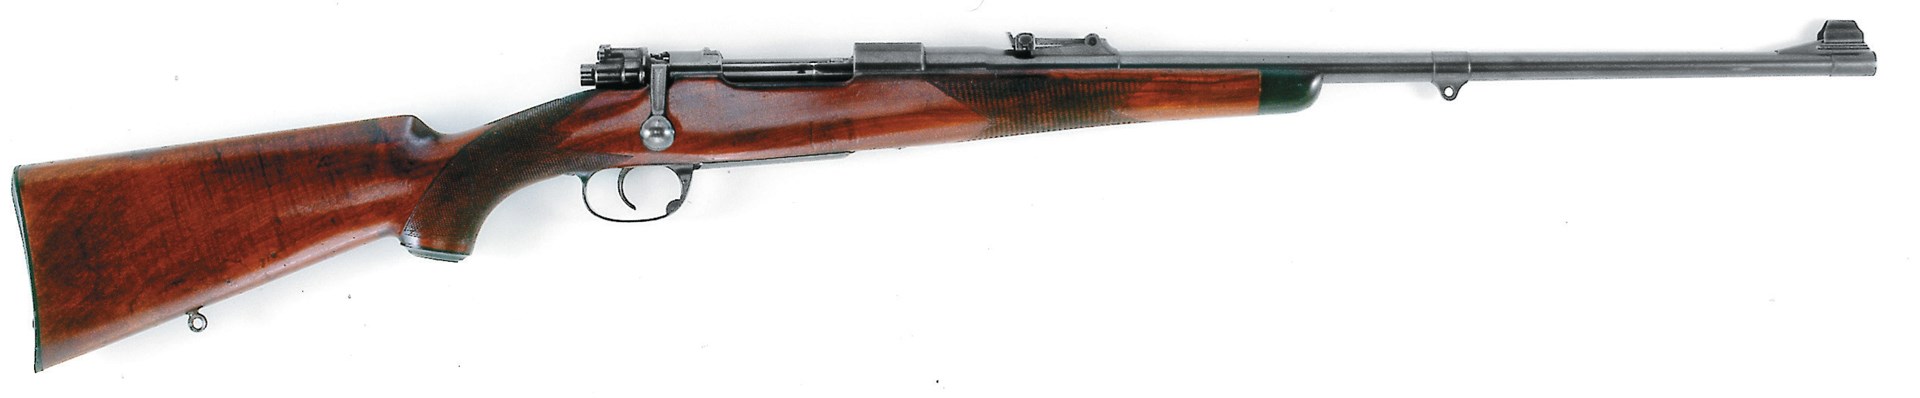 right side of wood stock bolt-action masuer rifle